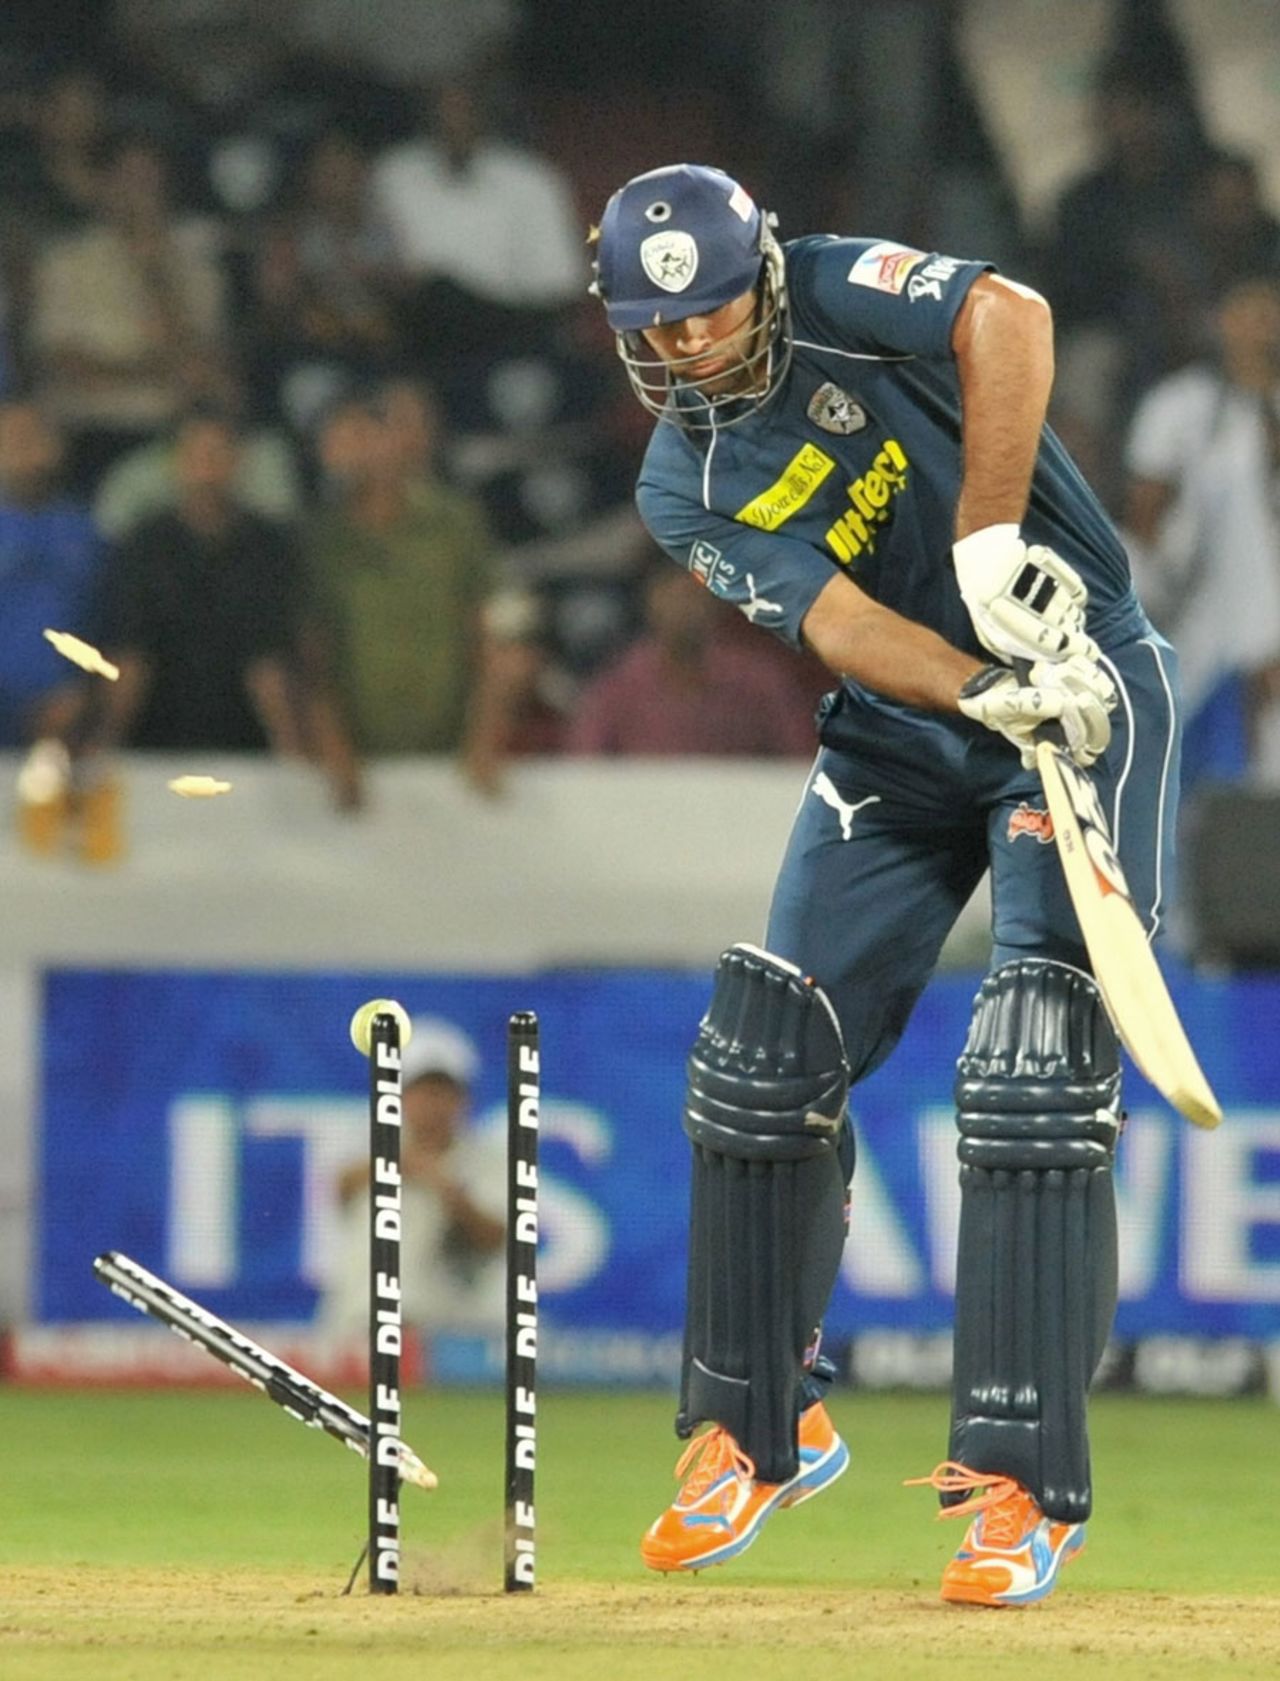 Manpreet Gony is bowled by Ryan McLaren for a golden duck, Deccan Chargers v Kings XI Punjab, April 16, 2011